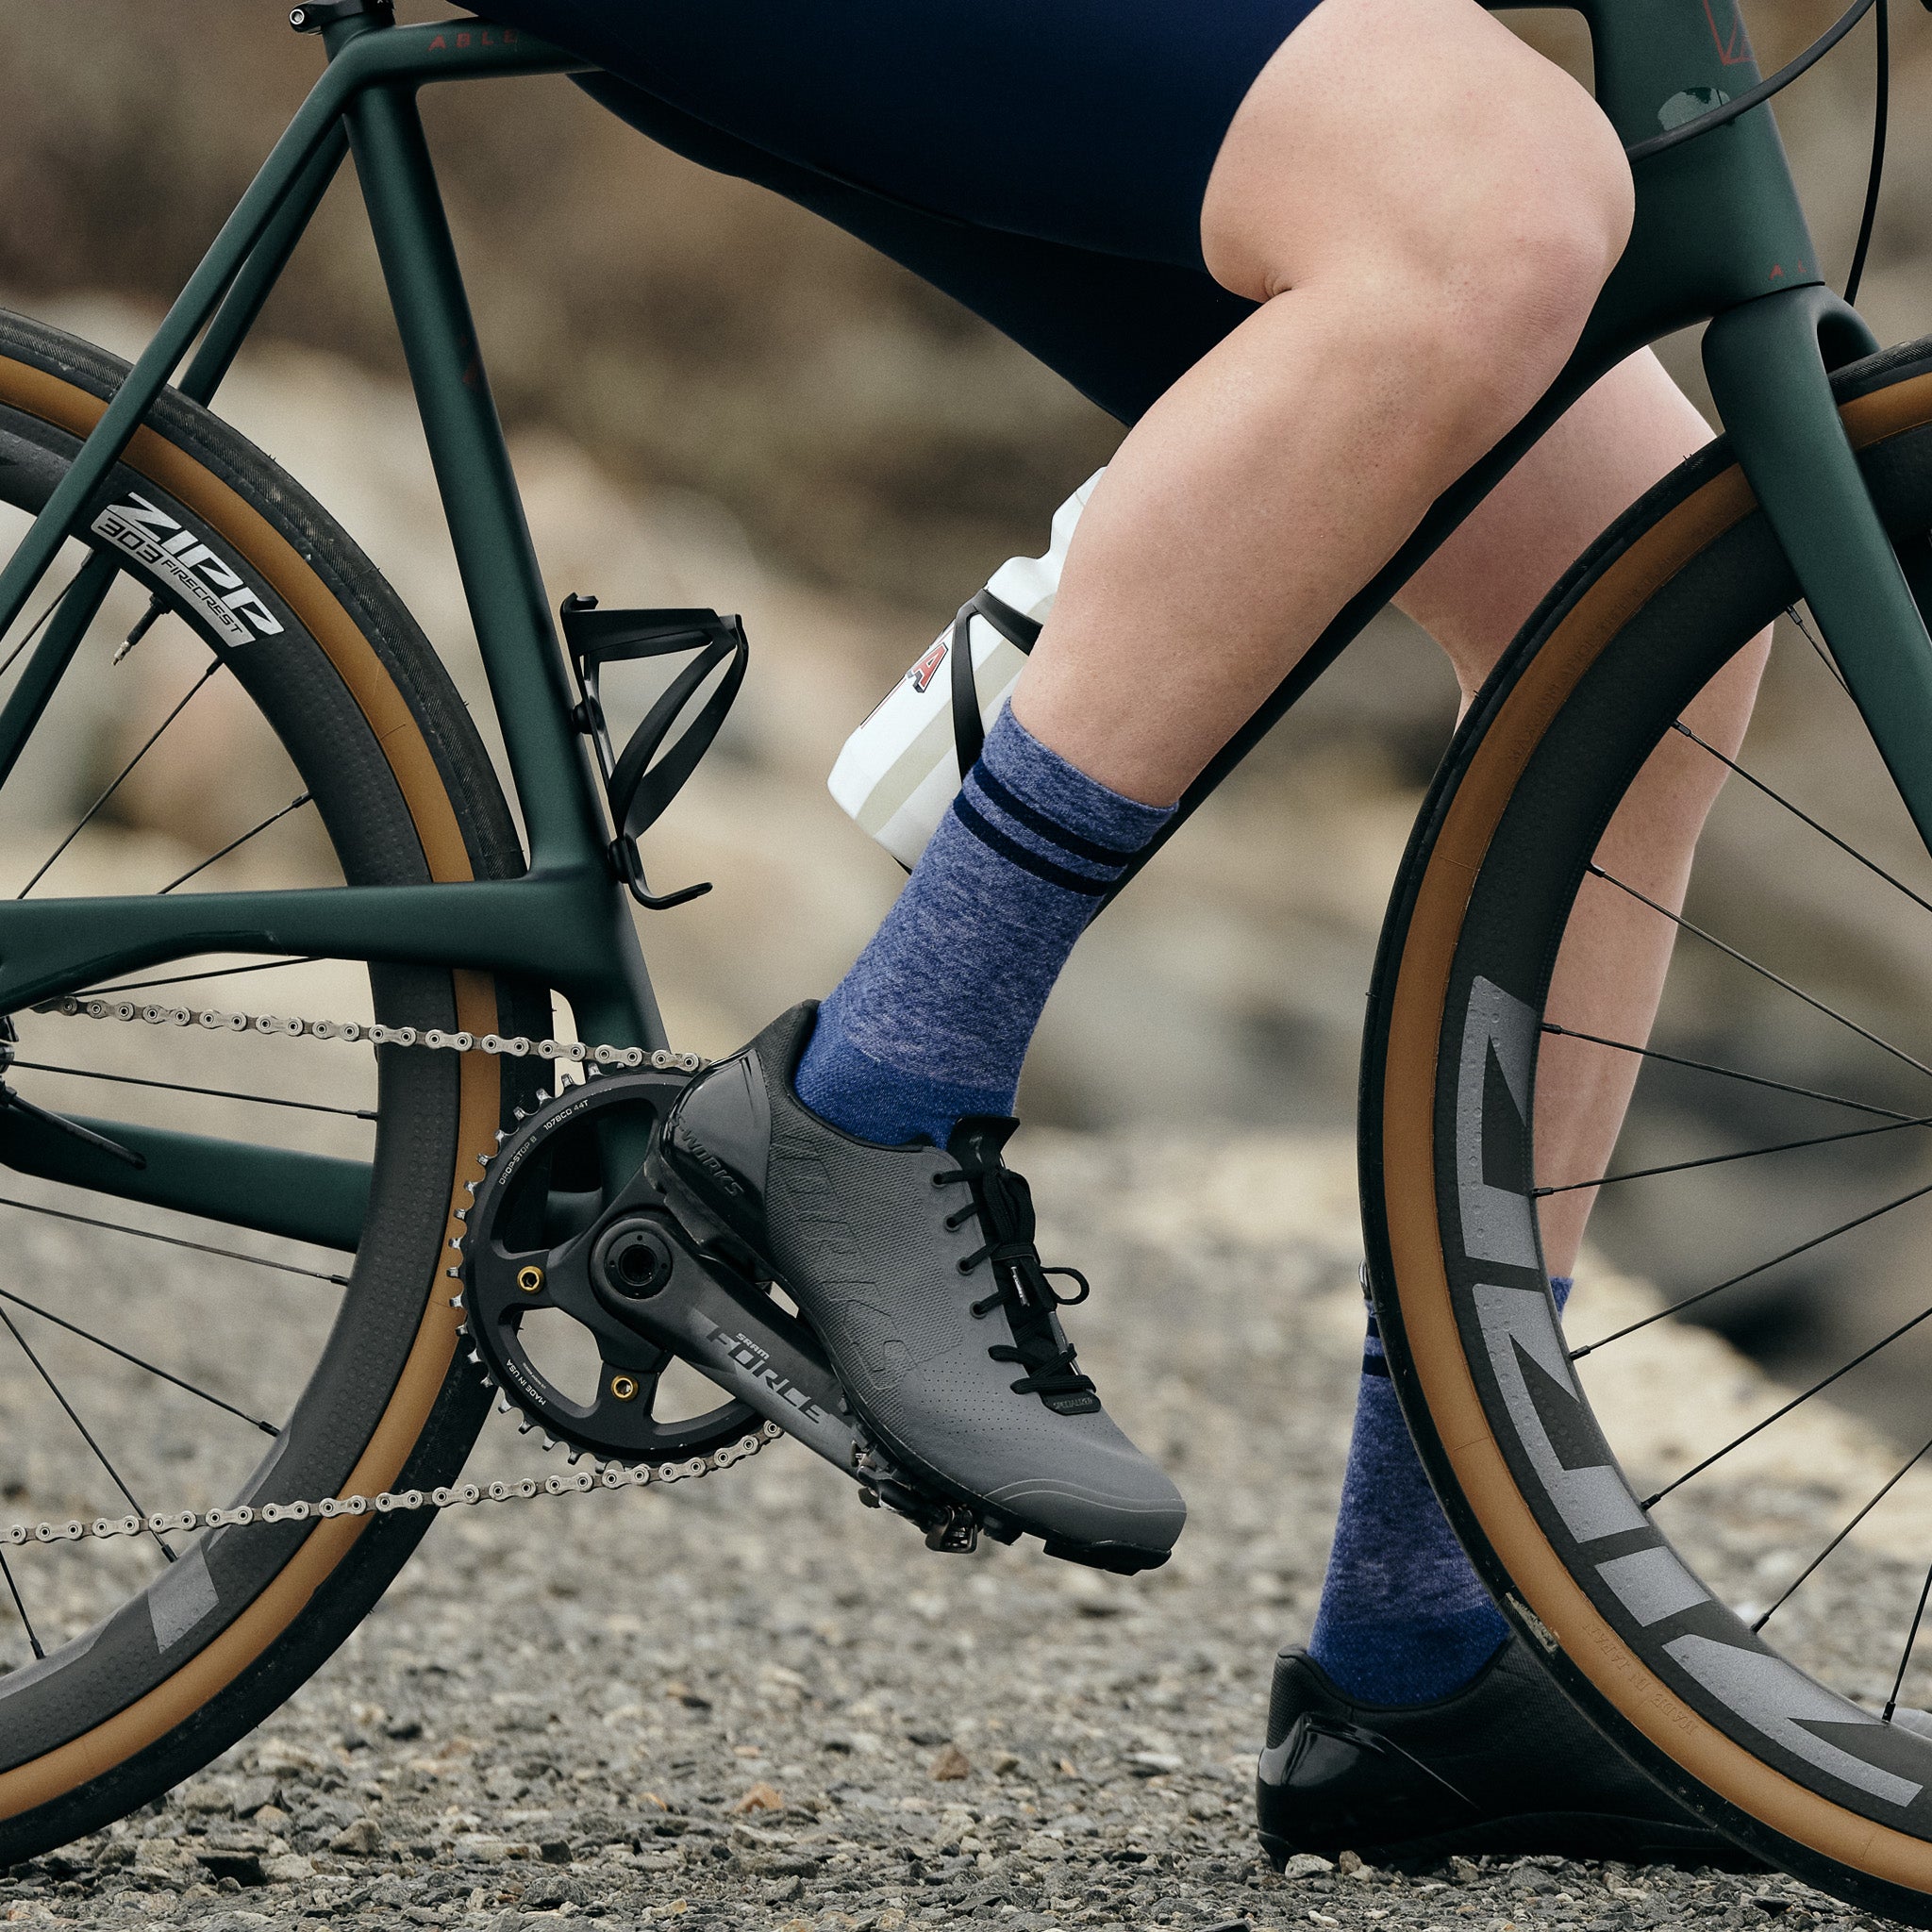 Pinebury Signature Merino Wool Sock in Blue. Close up side view of cyclist on a green gravel bike with their right foot on the pedal wearing a black and grey lace up cycling shoe and blue socks with two stripes at the top.